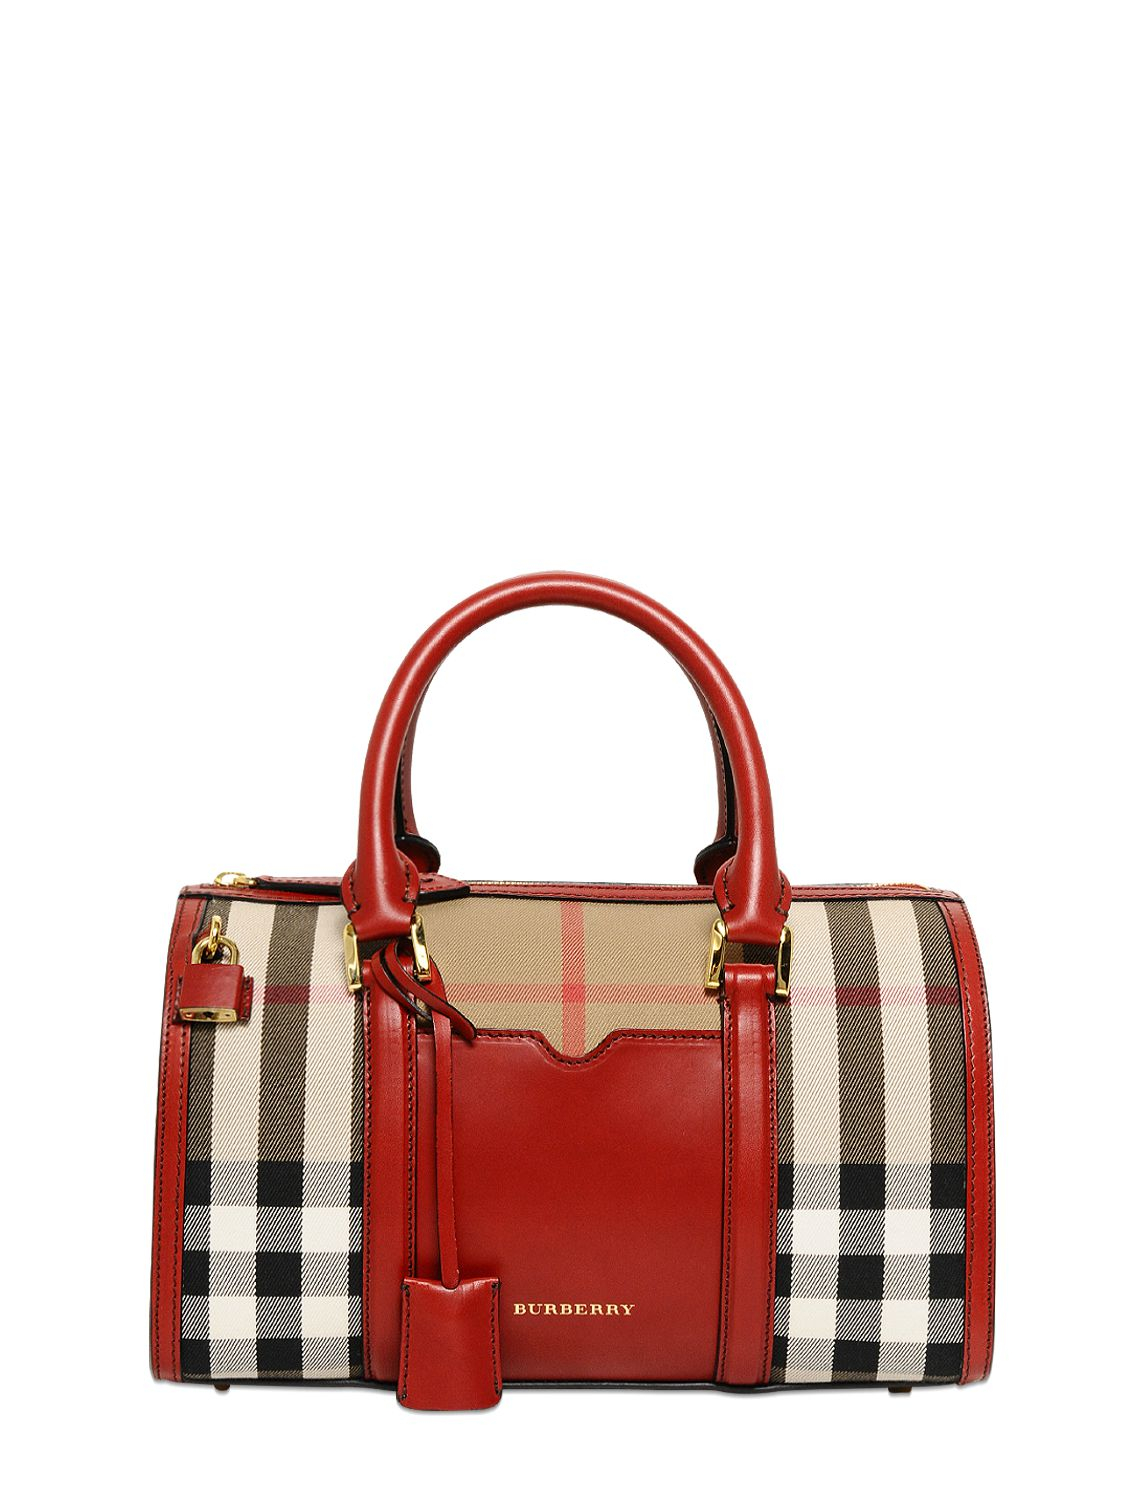 Burberry Medium Alchester Bridle Check Bag in Red - Lyst